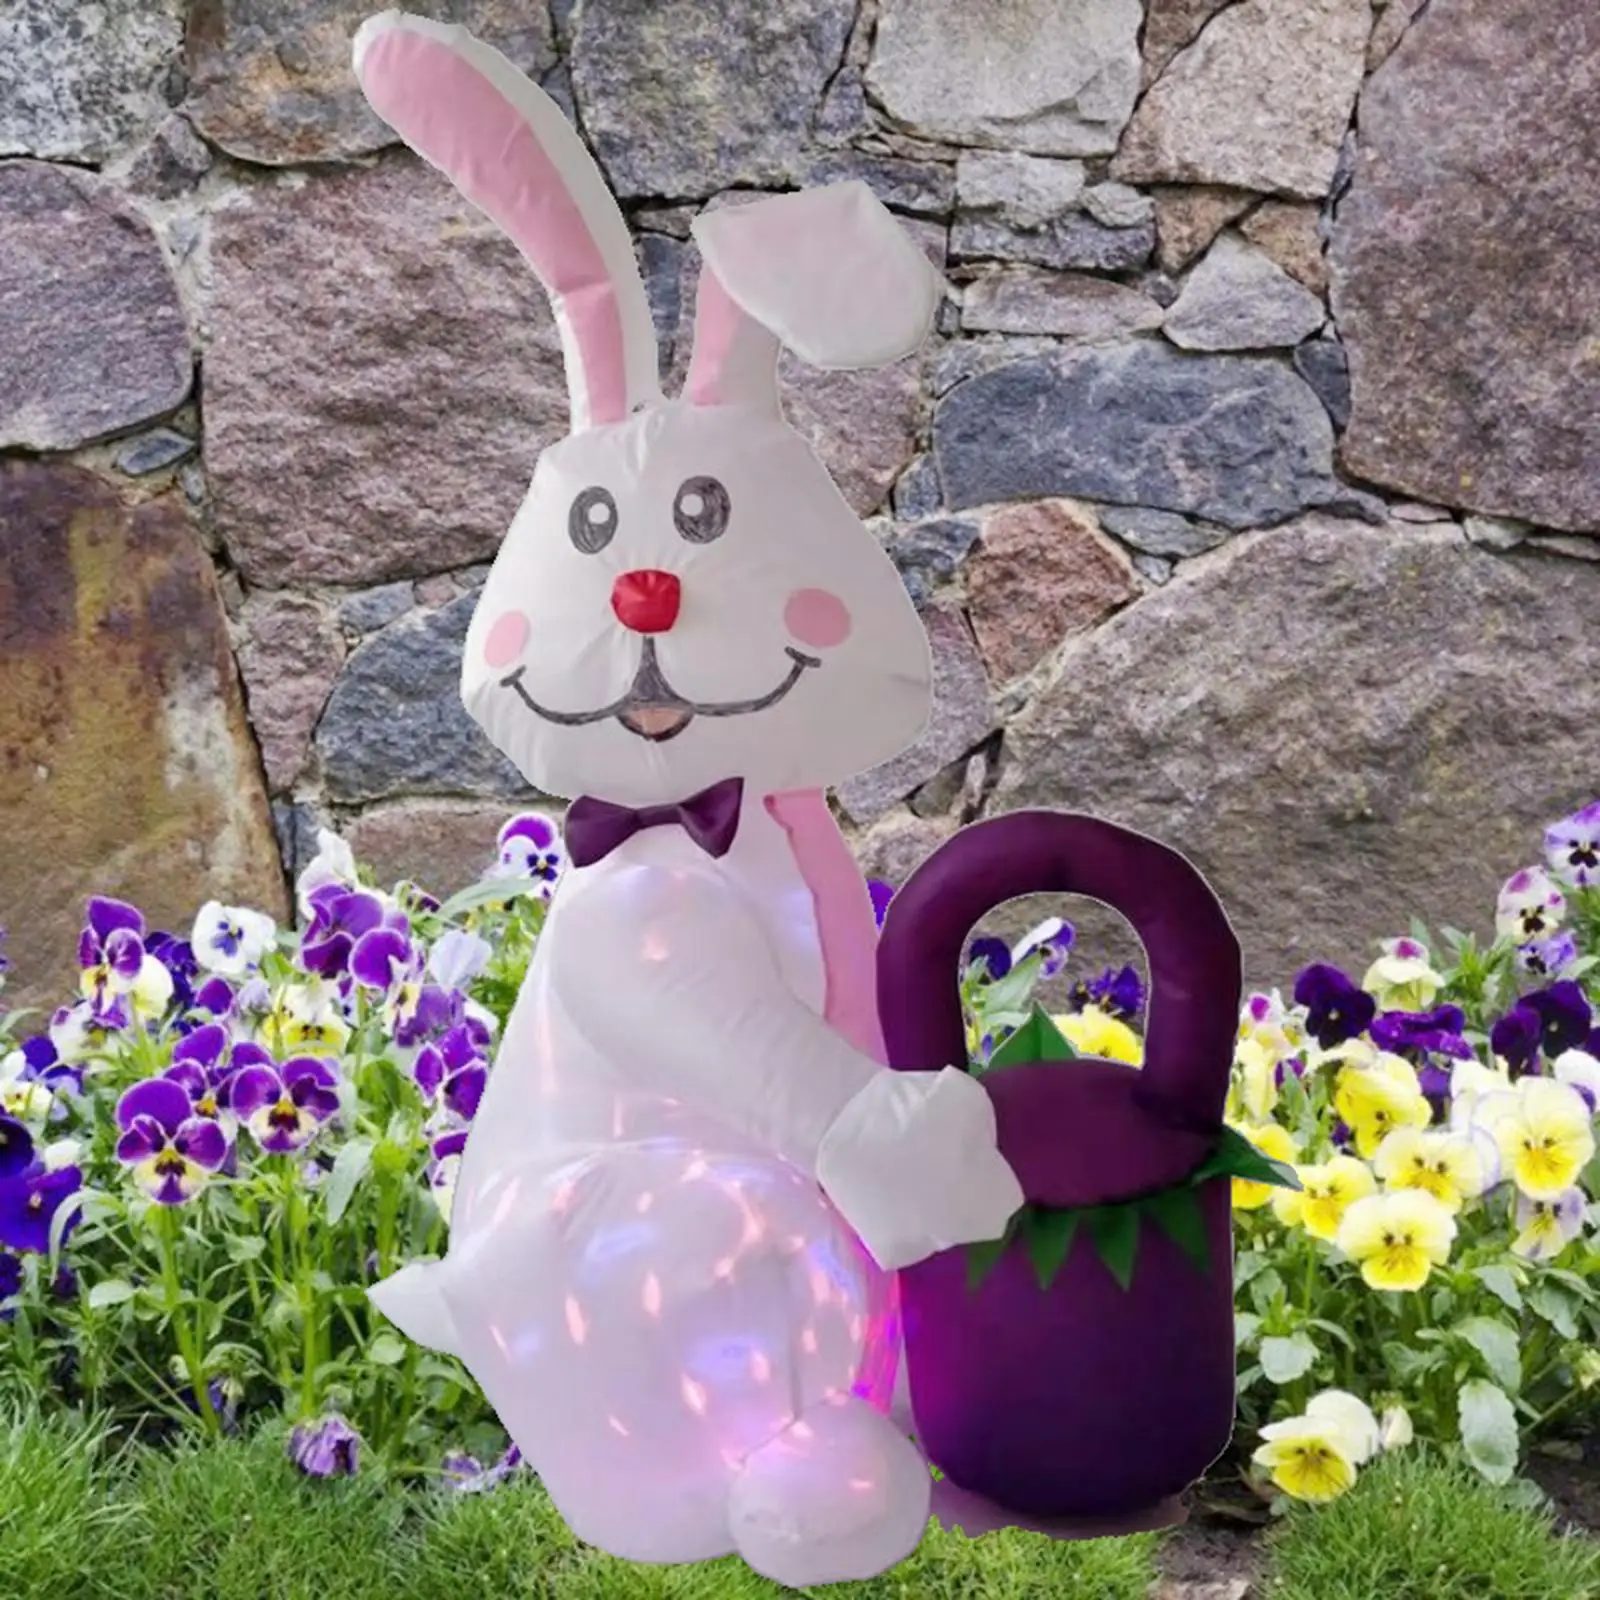 Cute LED Light Easter Inflatable Decorations Rabbit Inflatable Toys Rabbit Ornament for Home Patio Holiday Garden Decor